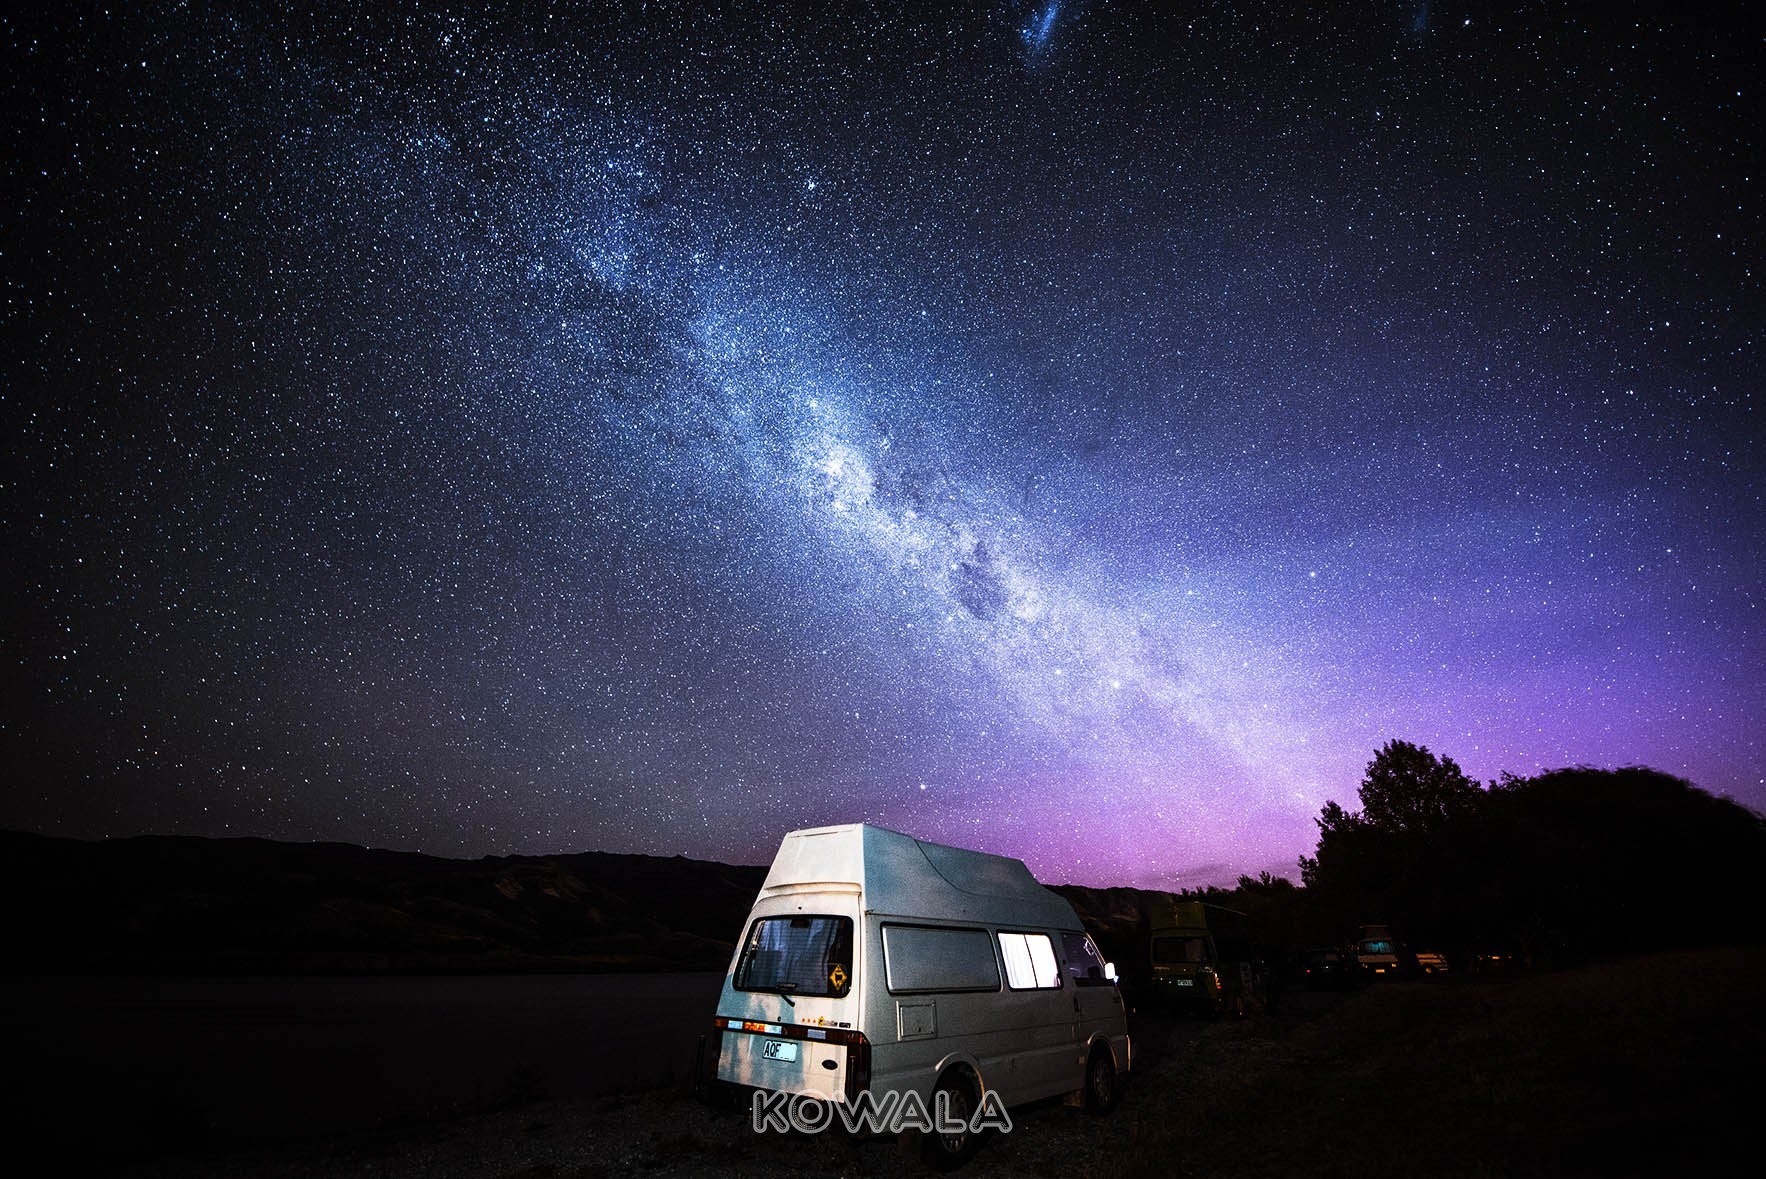 Milky way voie lactée pvt nouvelle zelande new zealand whv road trip backpacker world planet country voyage aoteroa NZ camping